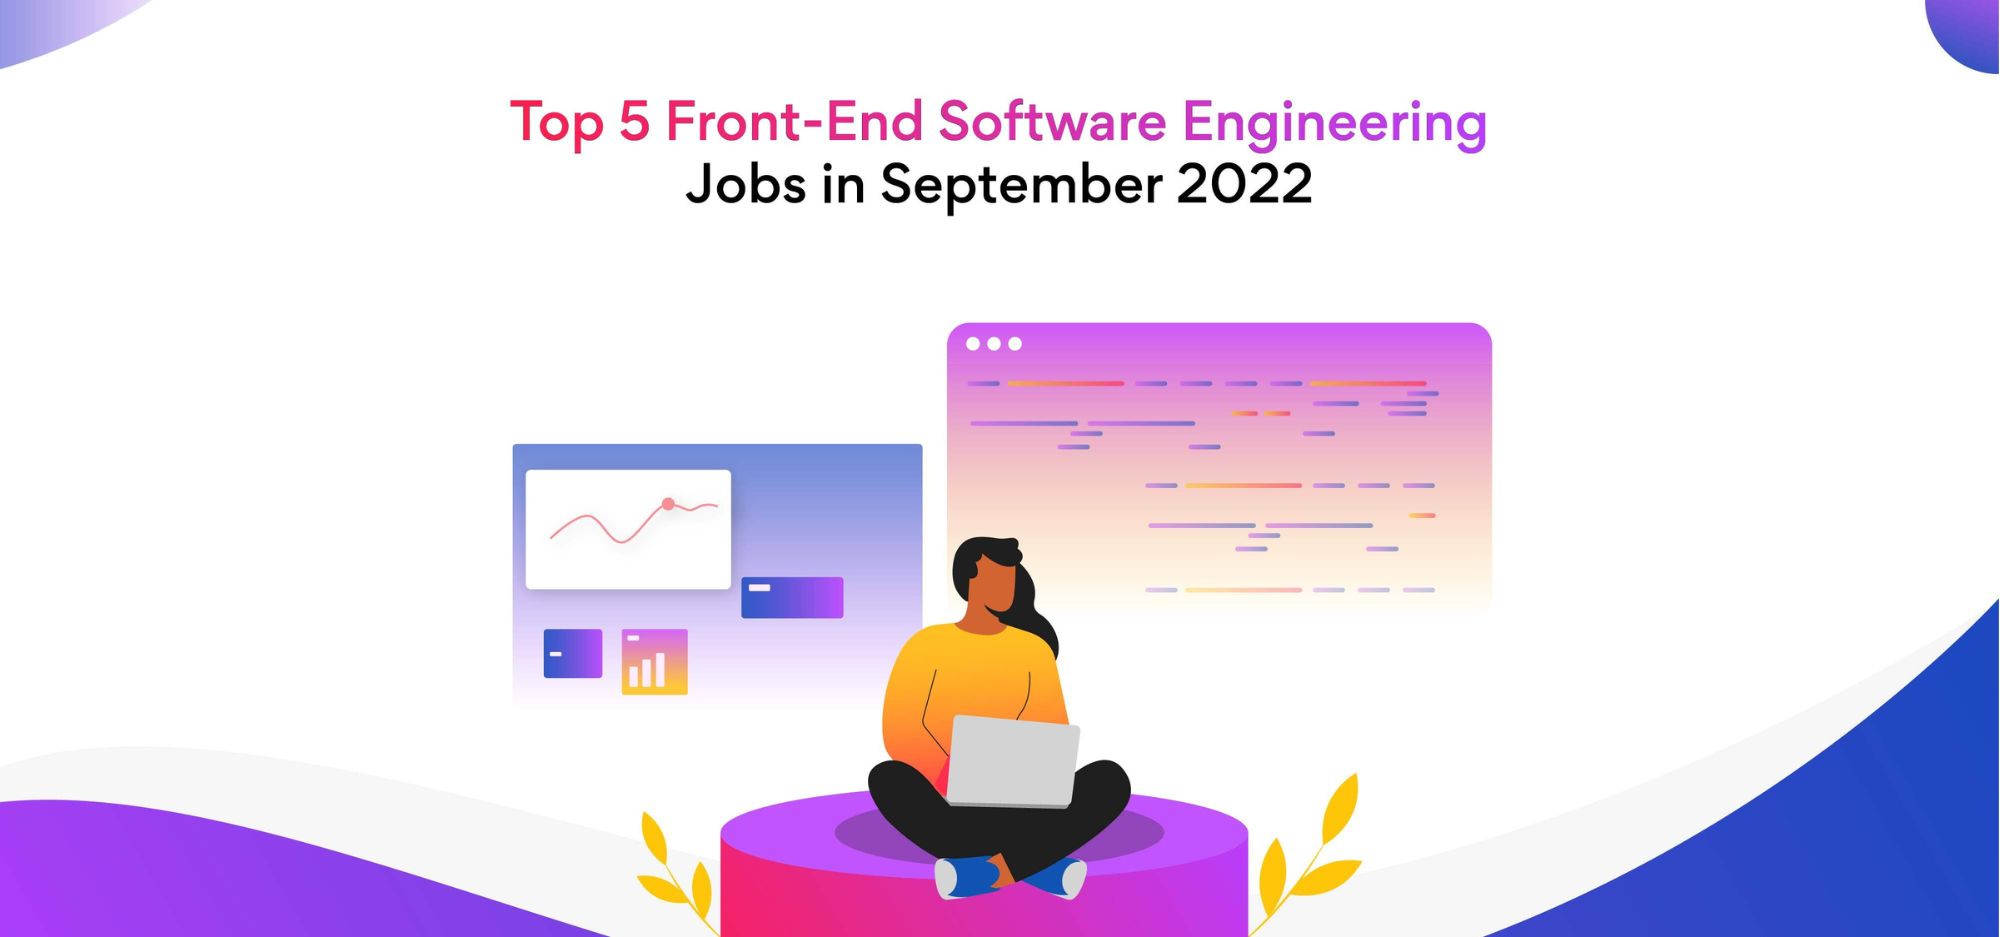 Front-end software engineering jobs in September 2022